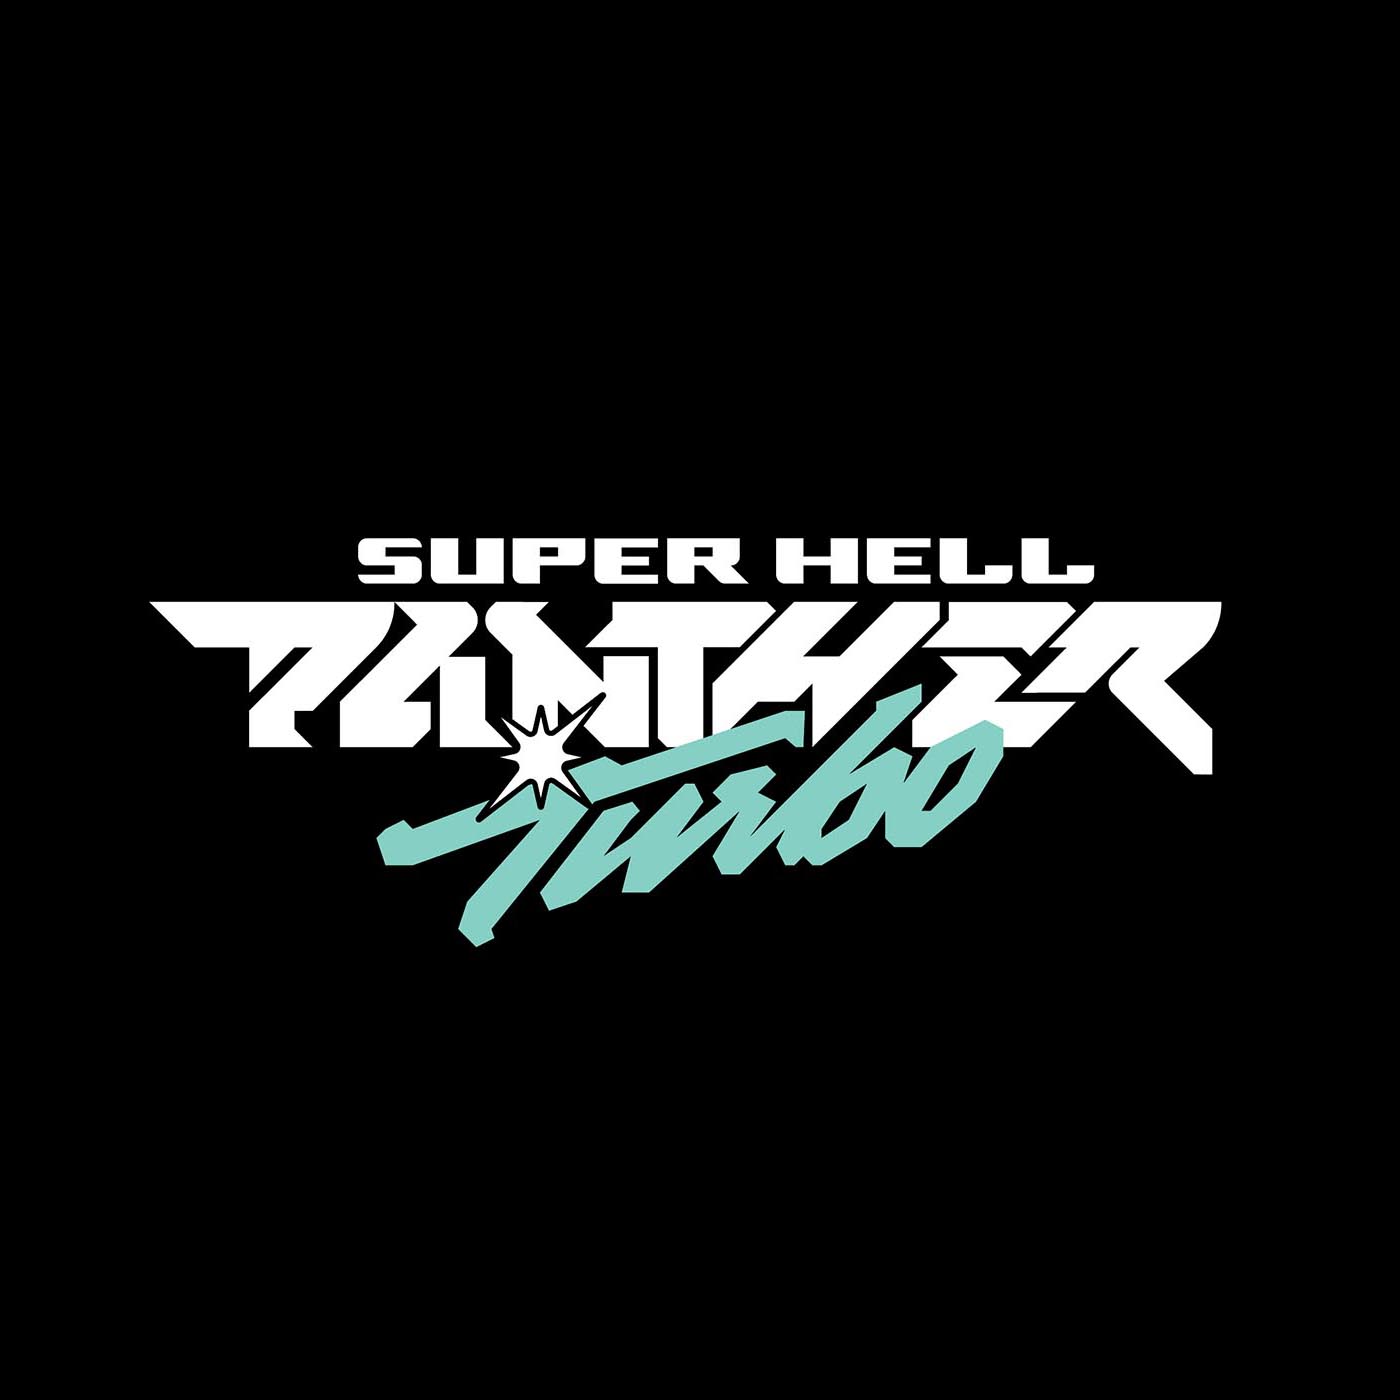 illustration of super hell panther turbo logo